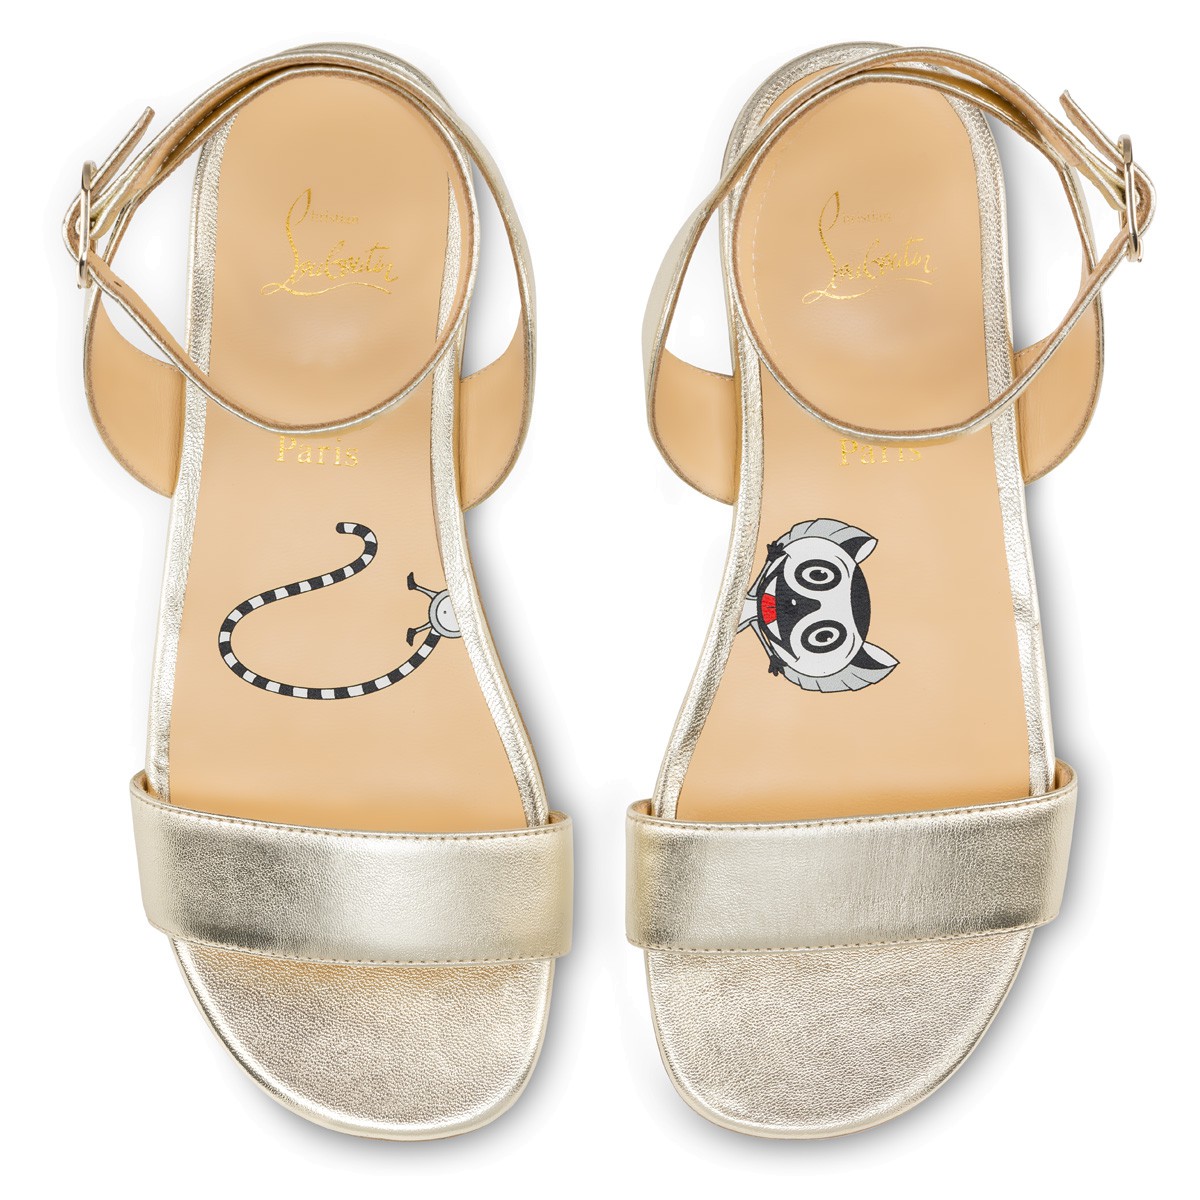 Shoes - Melodie Chick Sandal - Christian Louboutin